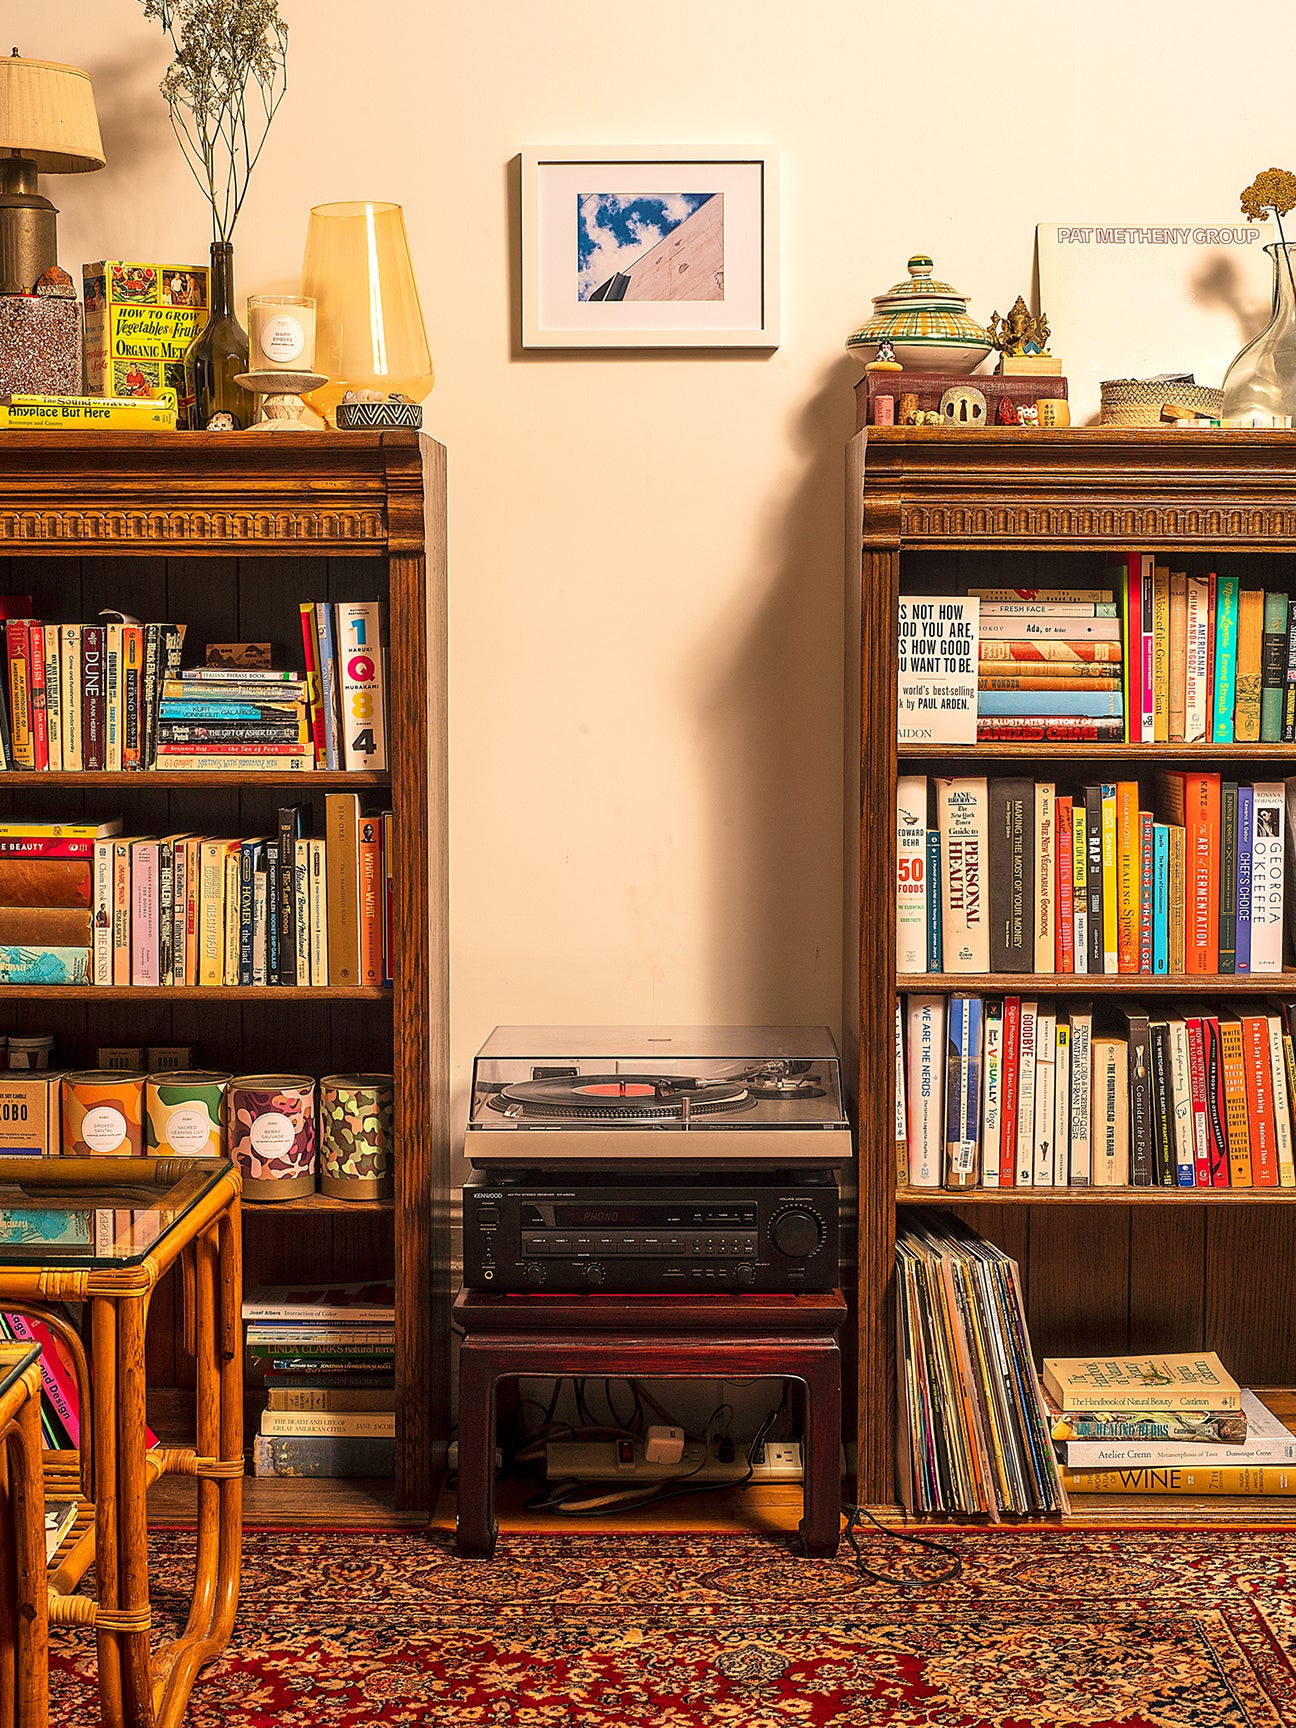 Bookshelves and record player